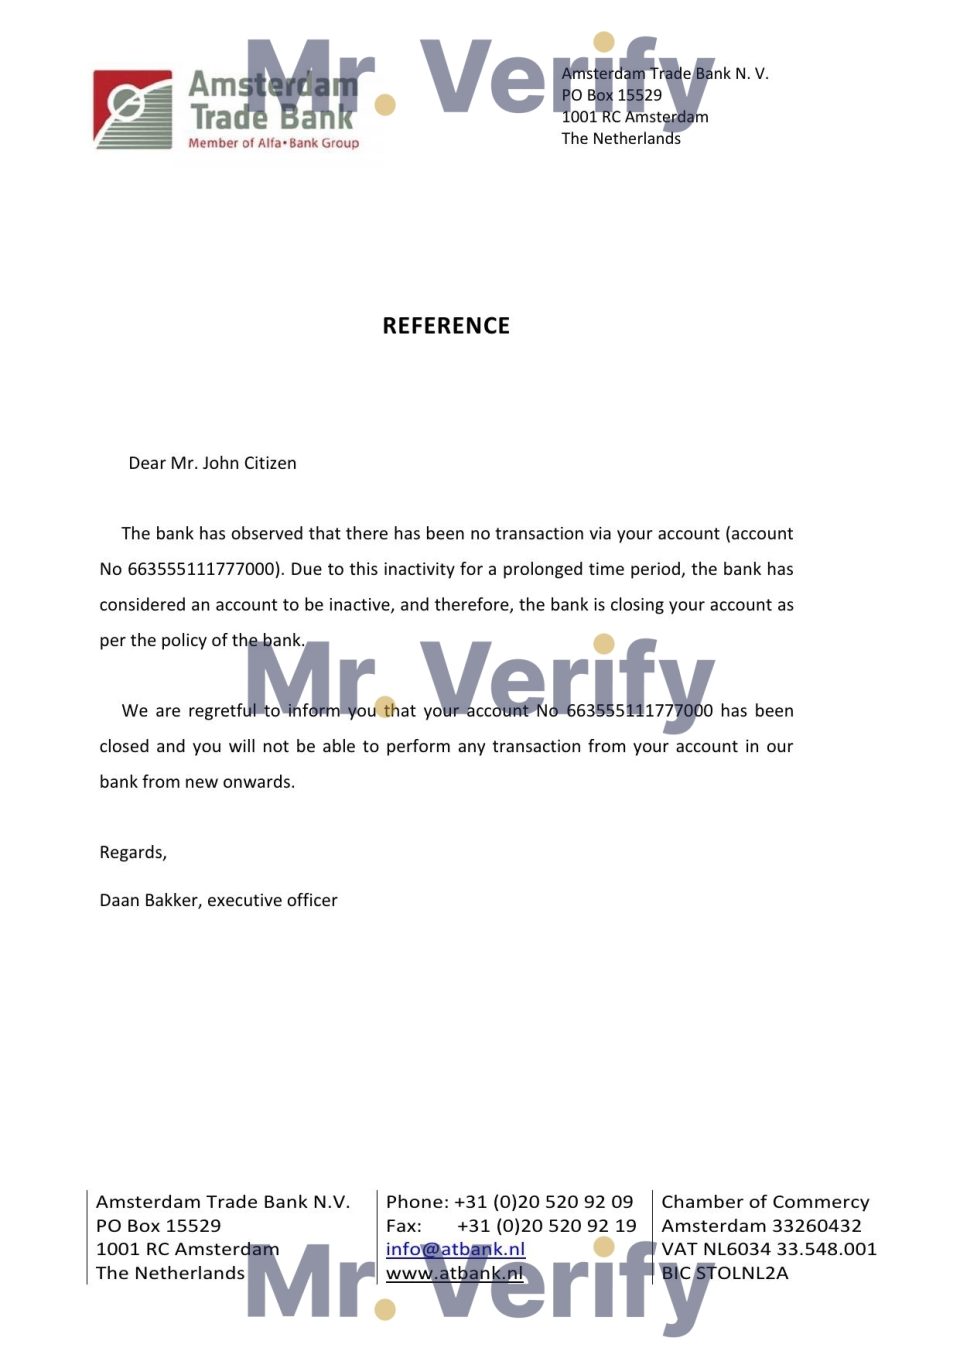 Download Netherlands Amsterdam Trade Bank Reference Letter Templates | Editable Word